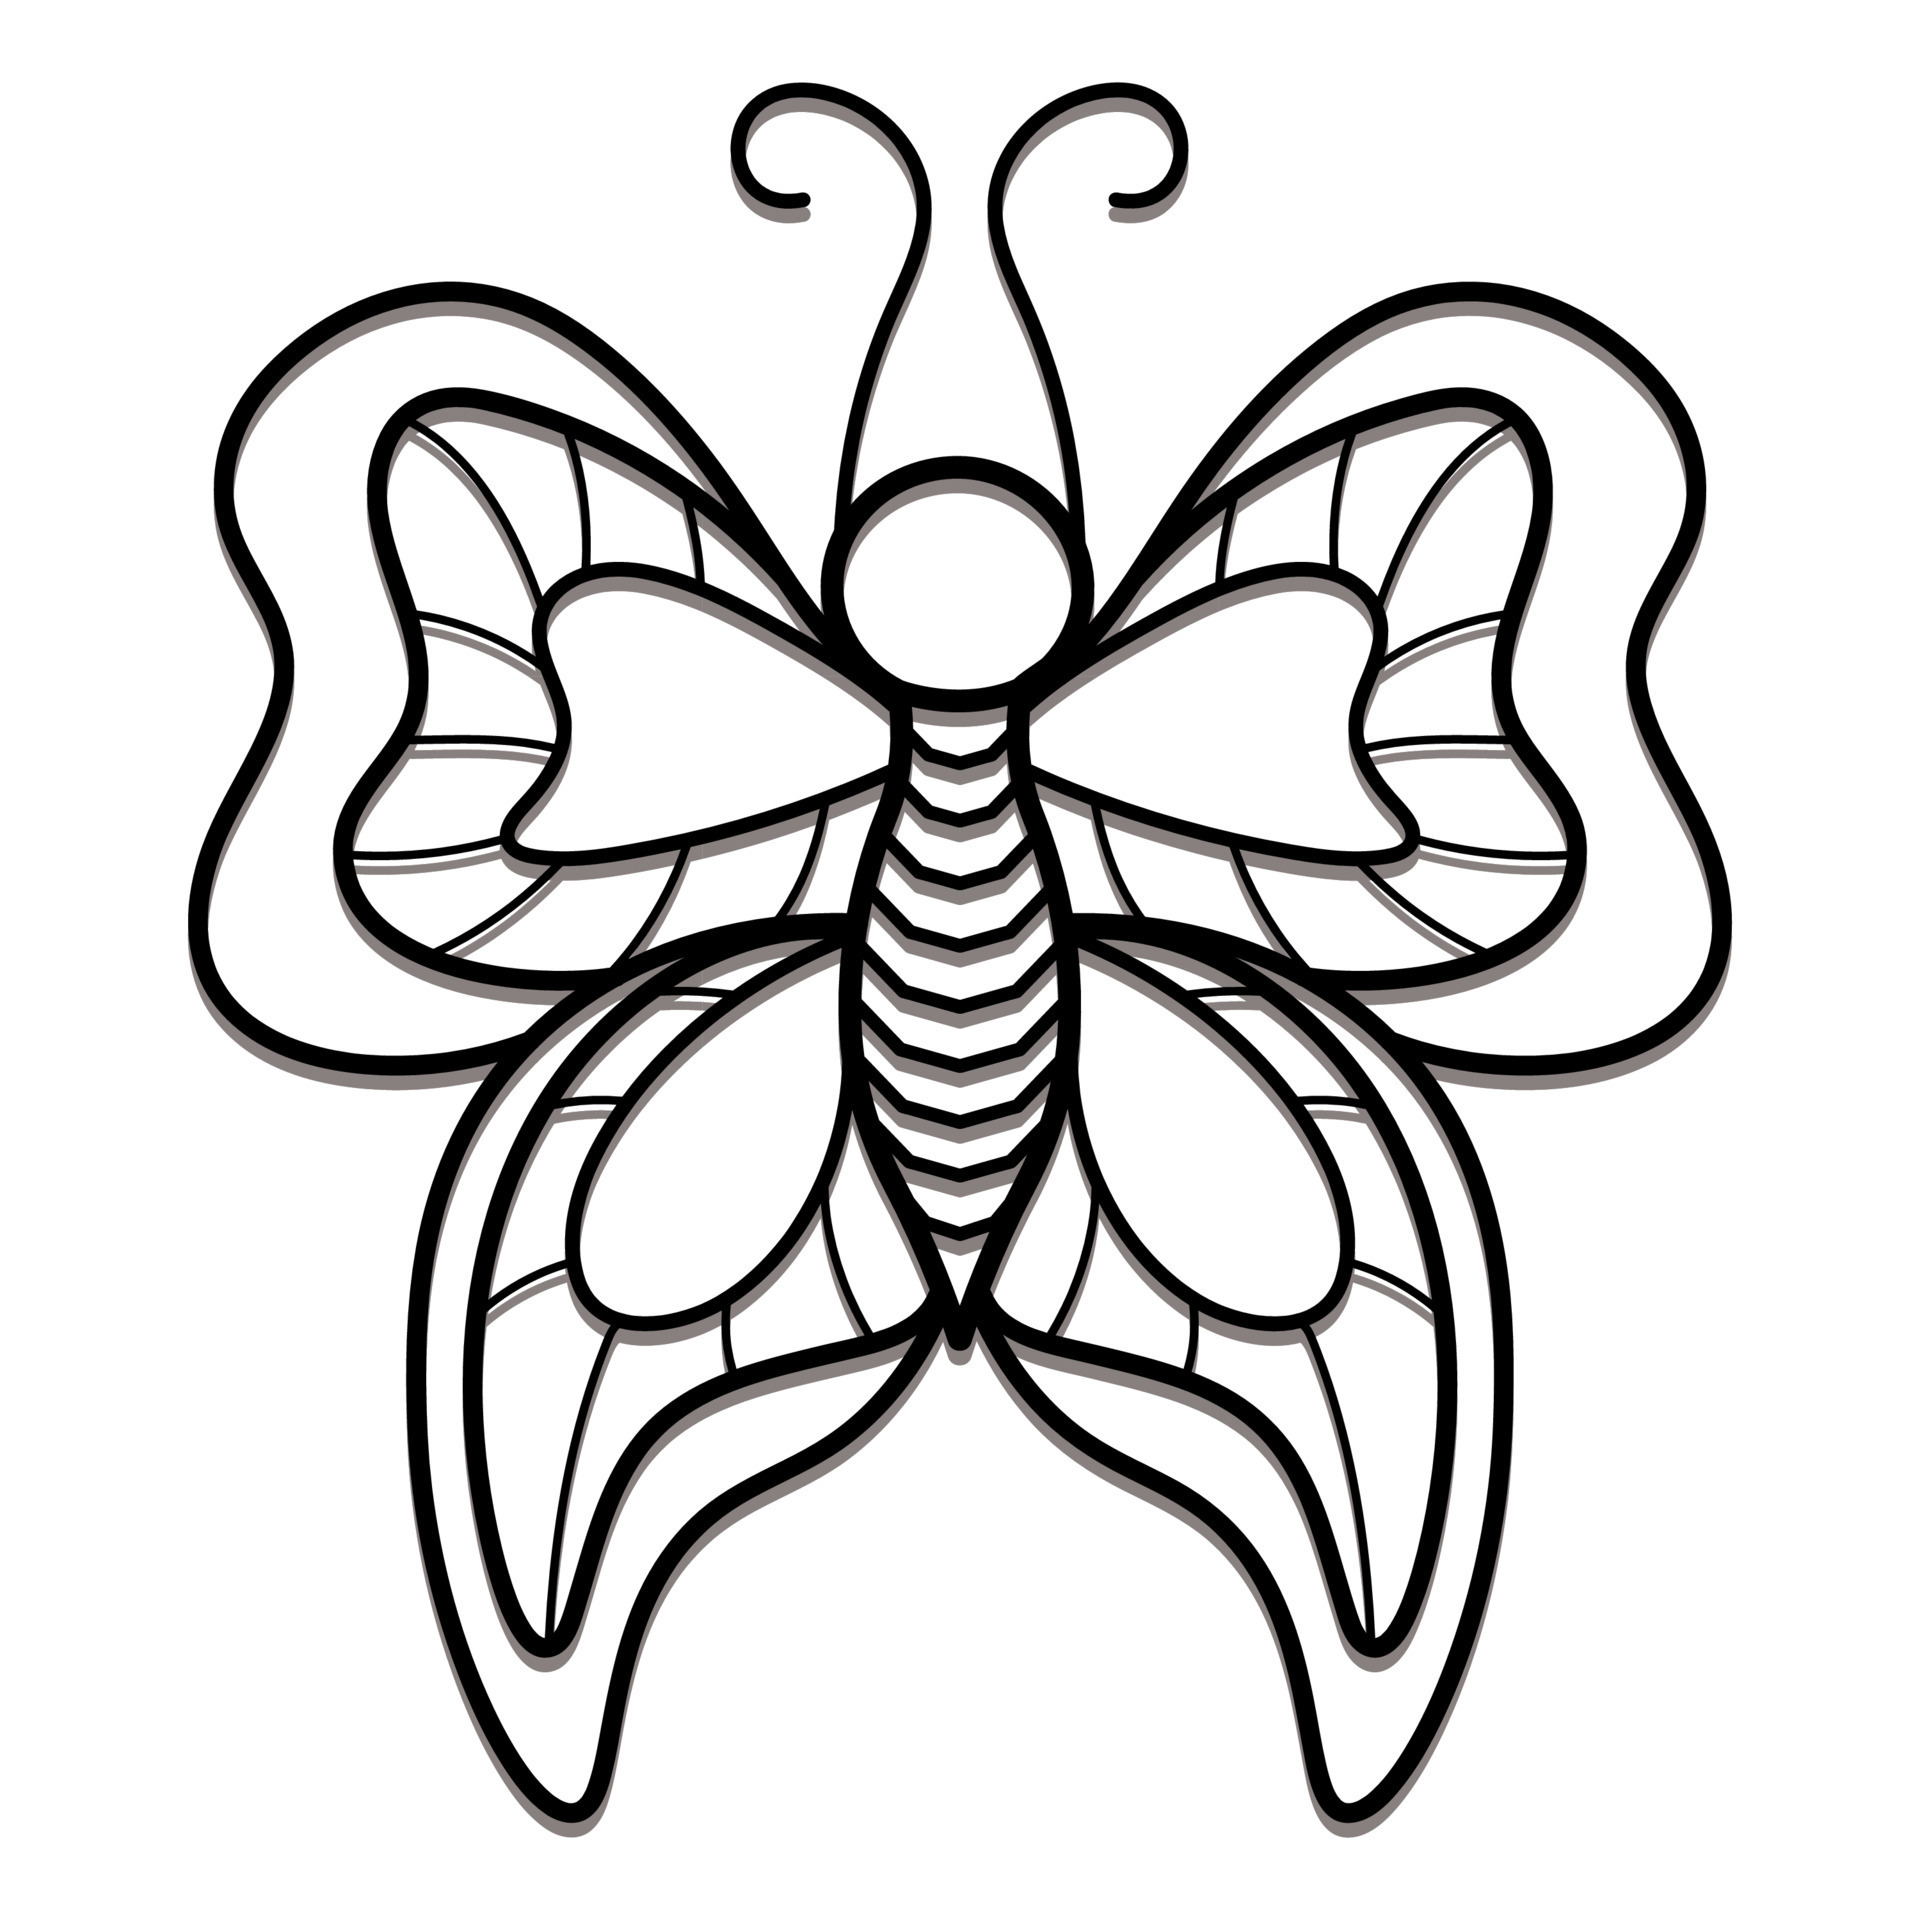 Coloring page with cartoon butterfly drawing kids Vector Image-omiya.com.vn